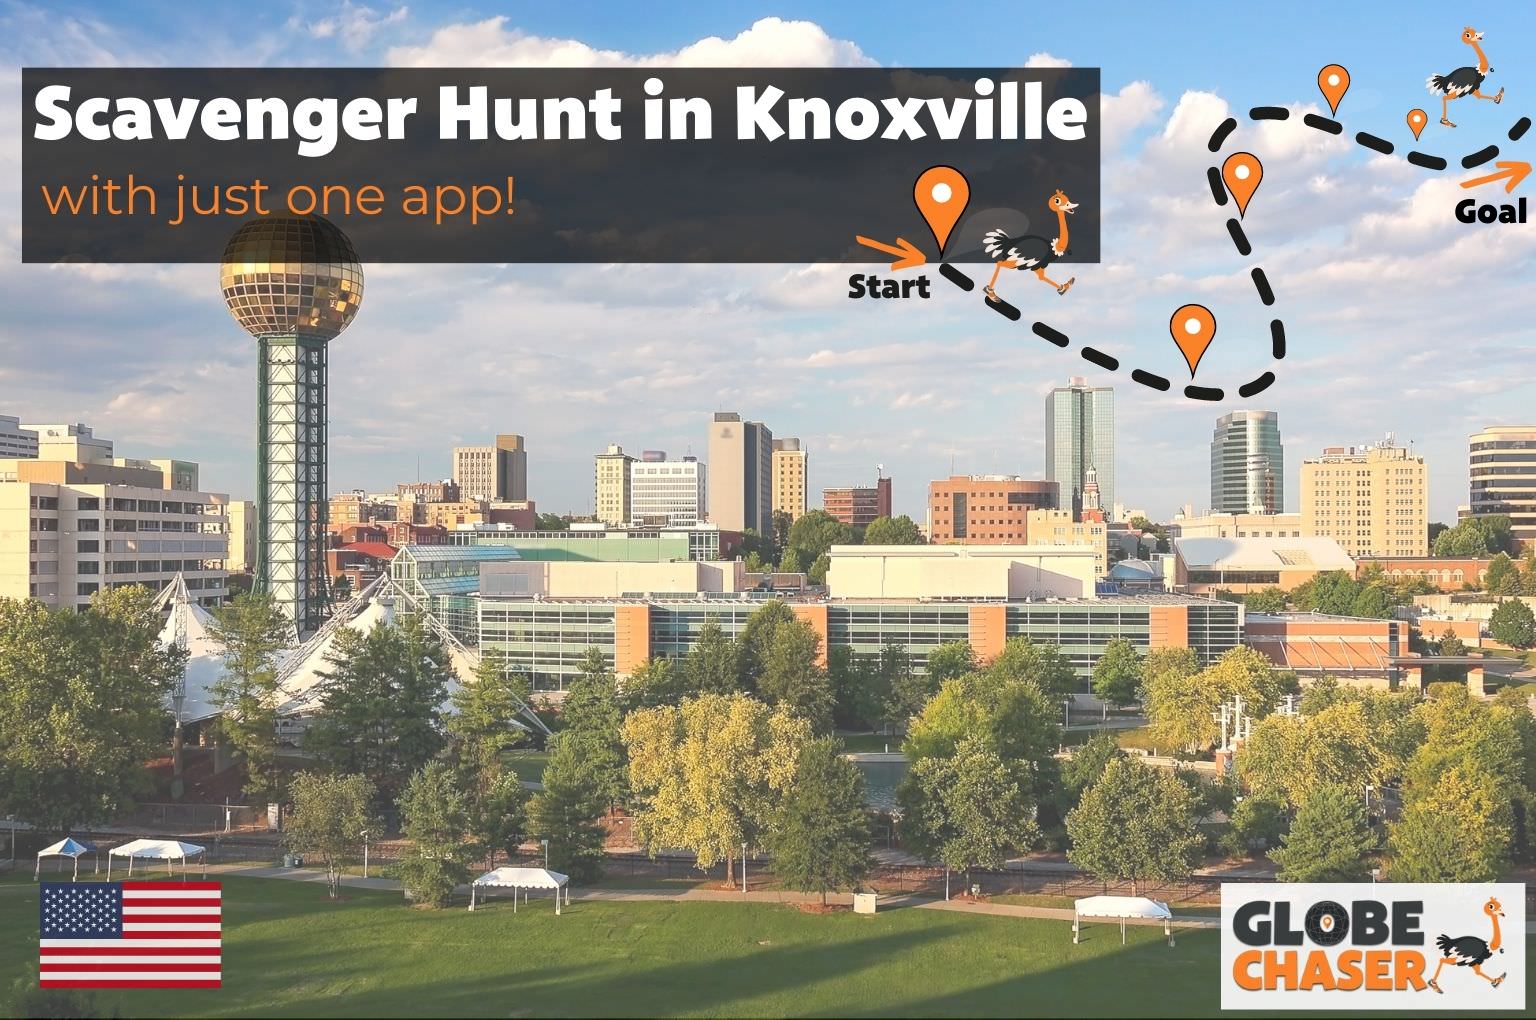 Scavenger Hunt in Knoxville, USA - Family Activities with the Globe Chaser App for Outdoor Fun